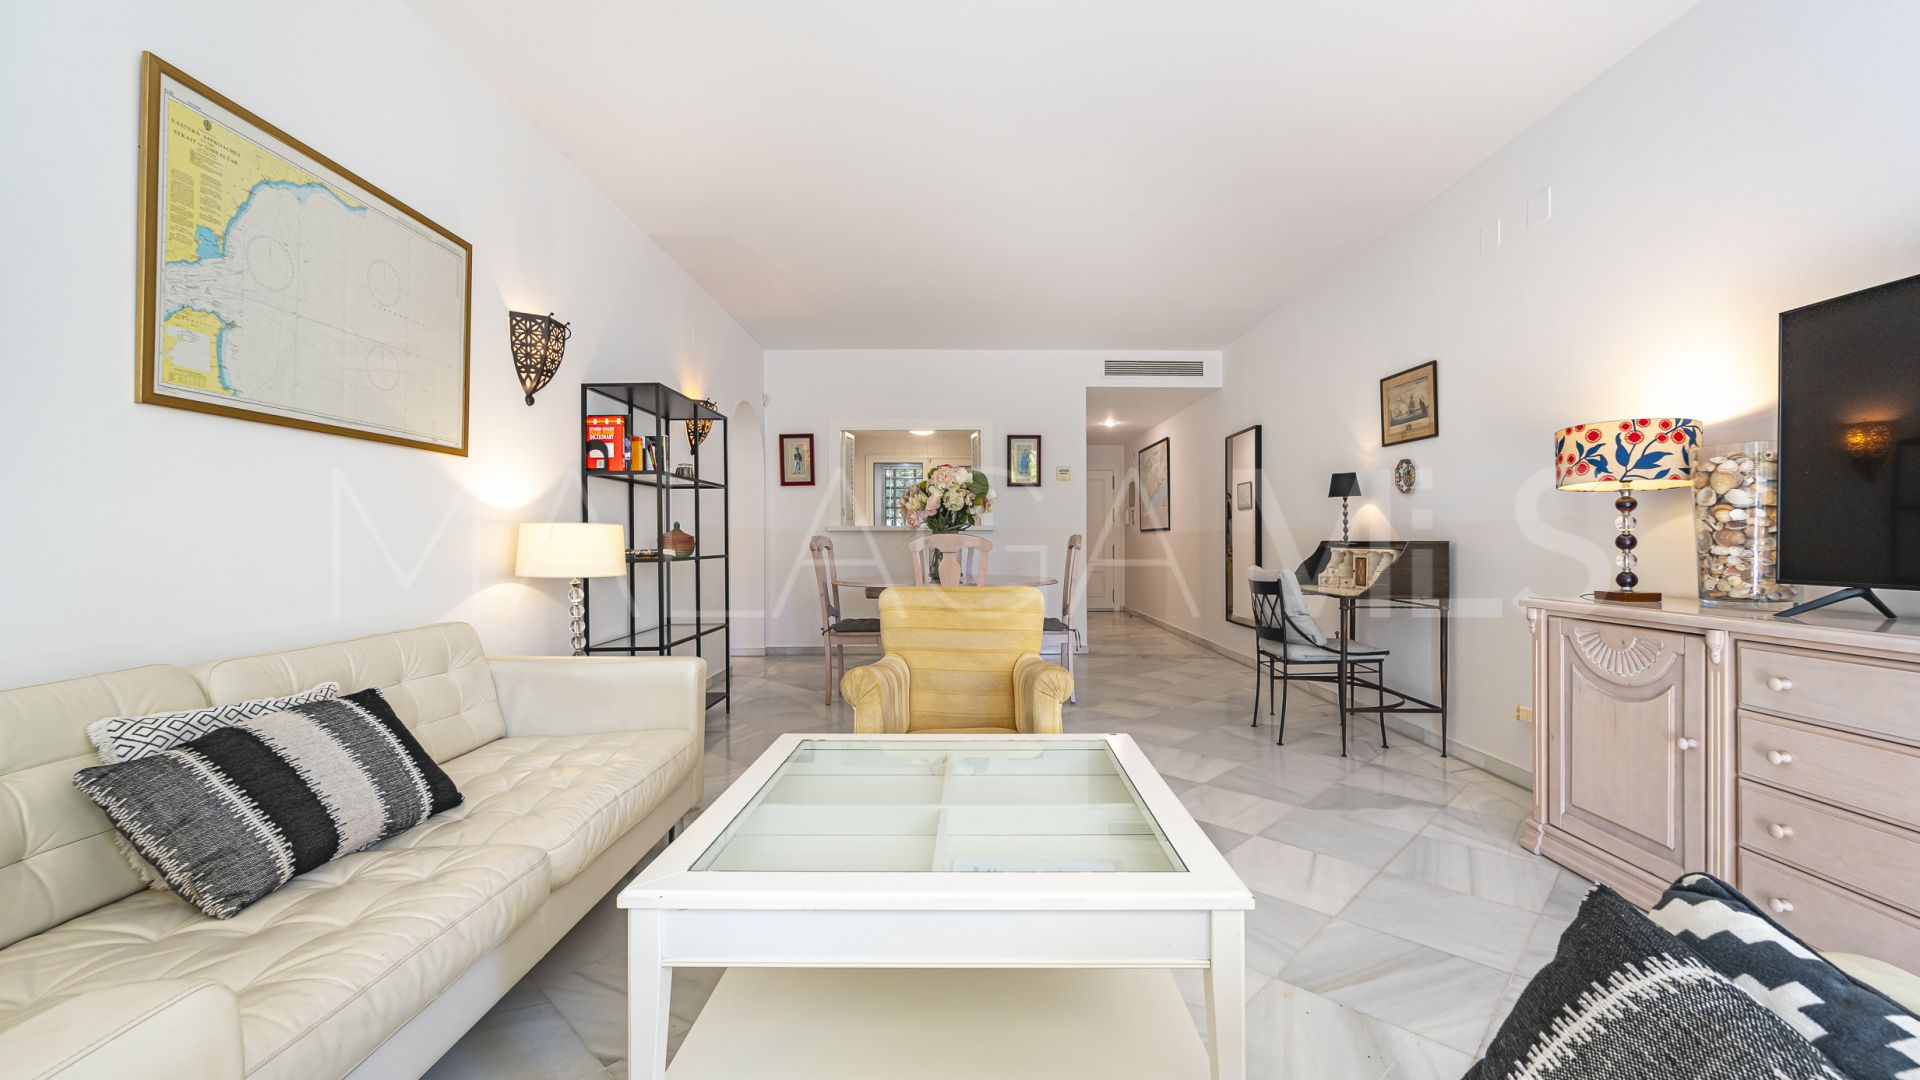 Alhambra del Mar 2 bedrooms ground floor apartment for sale